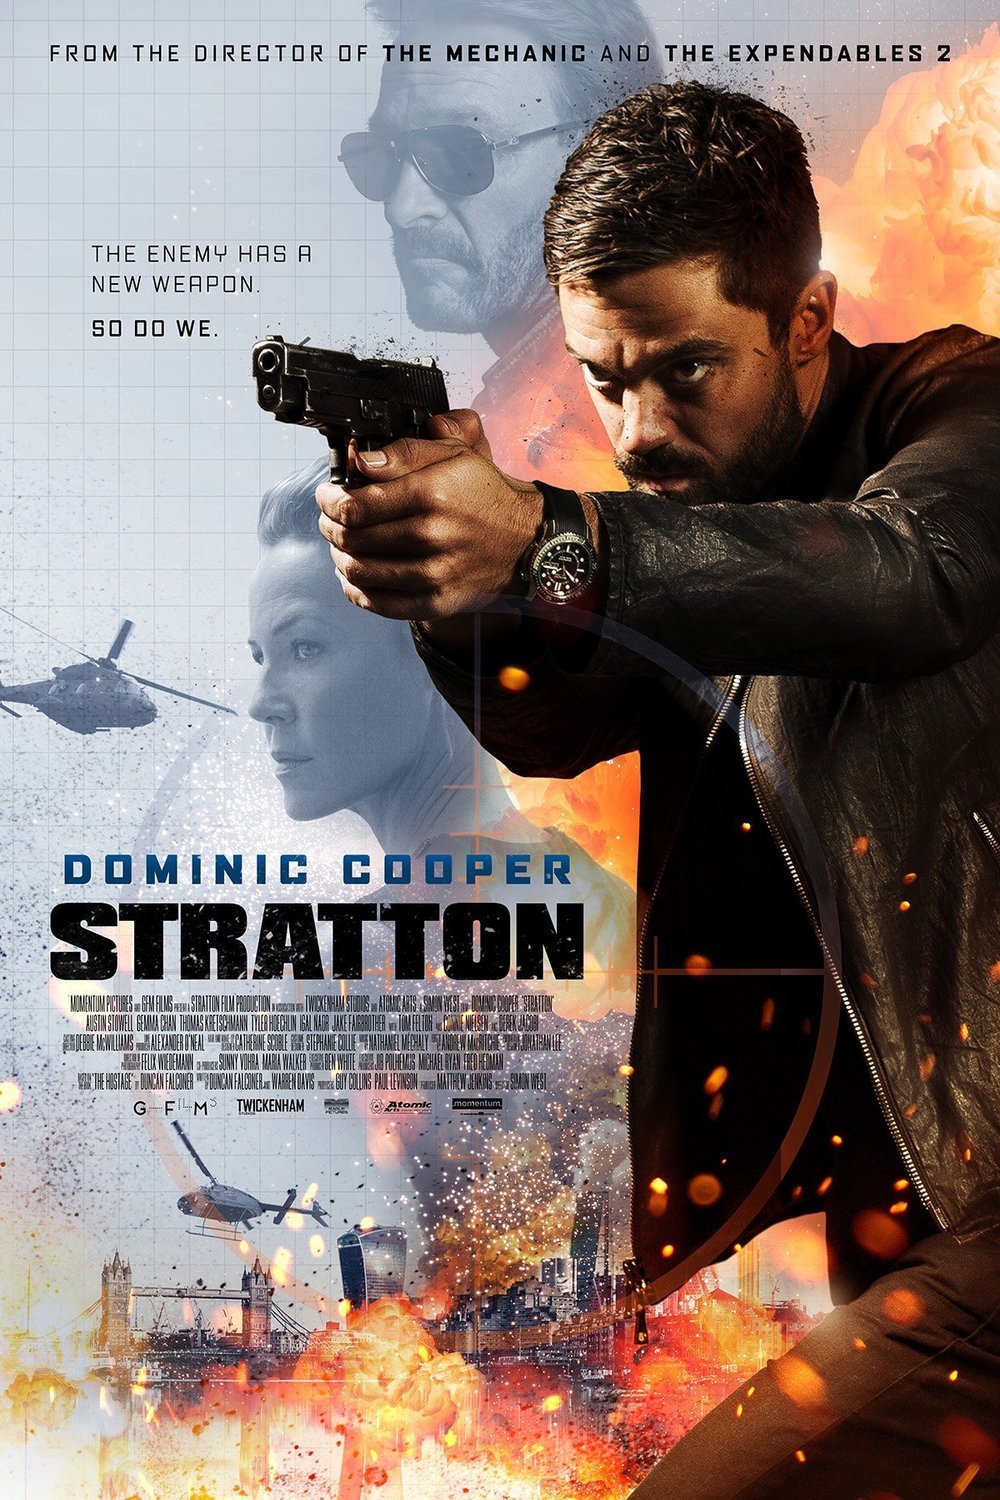 Poster of the movie Stratton